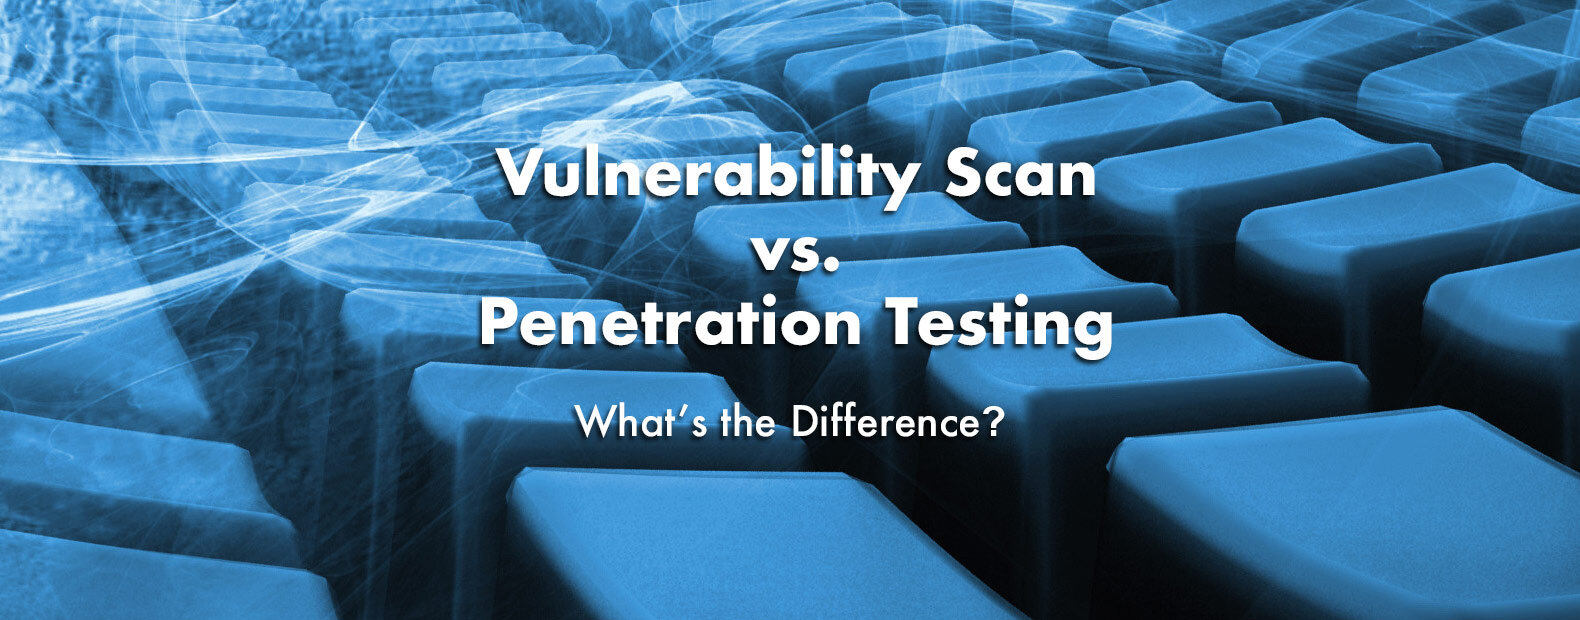 Vulnerability Scan Vs Penetration Test: What's The Difference